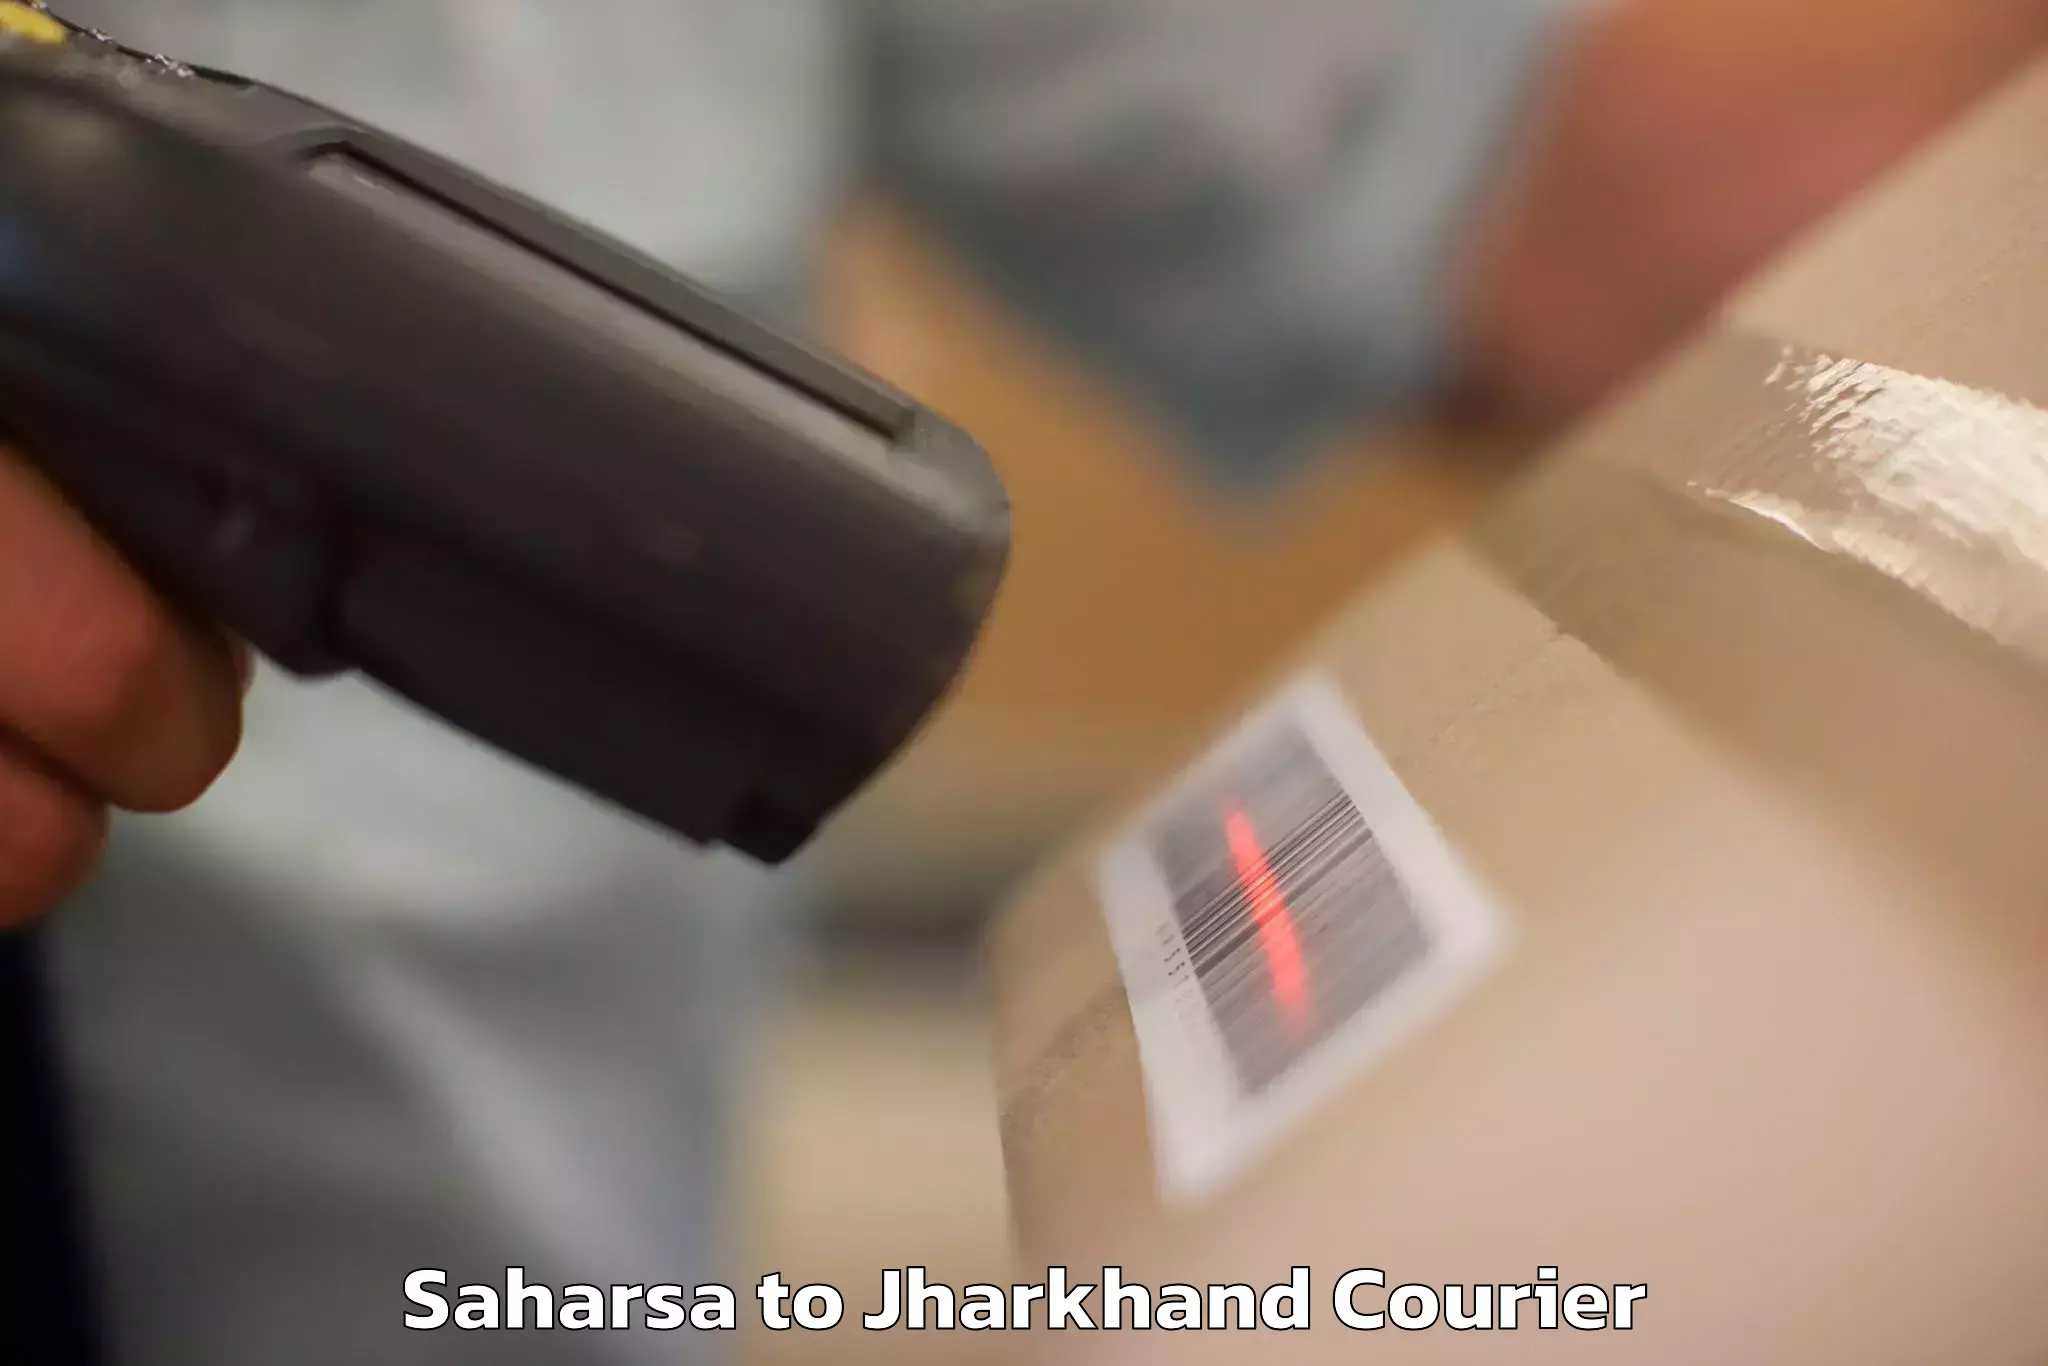 Personal effects shipping in Saharsa to Jharkhand